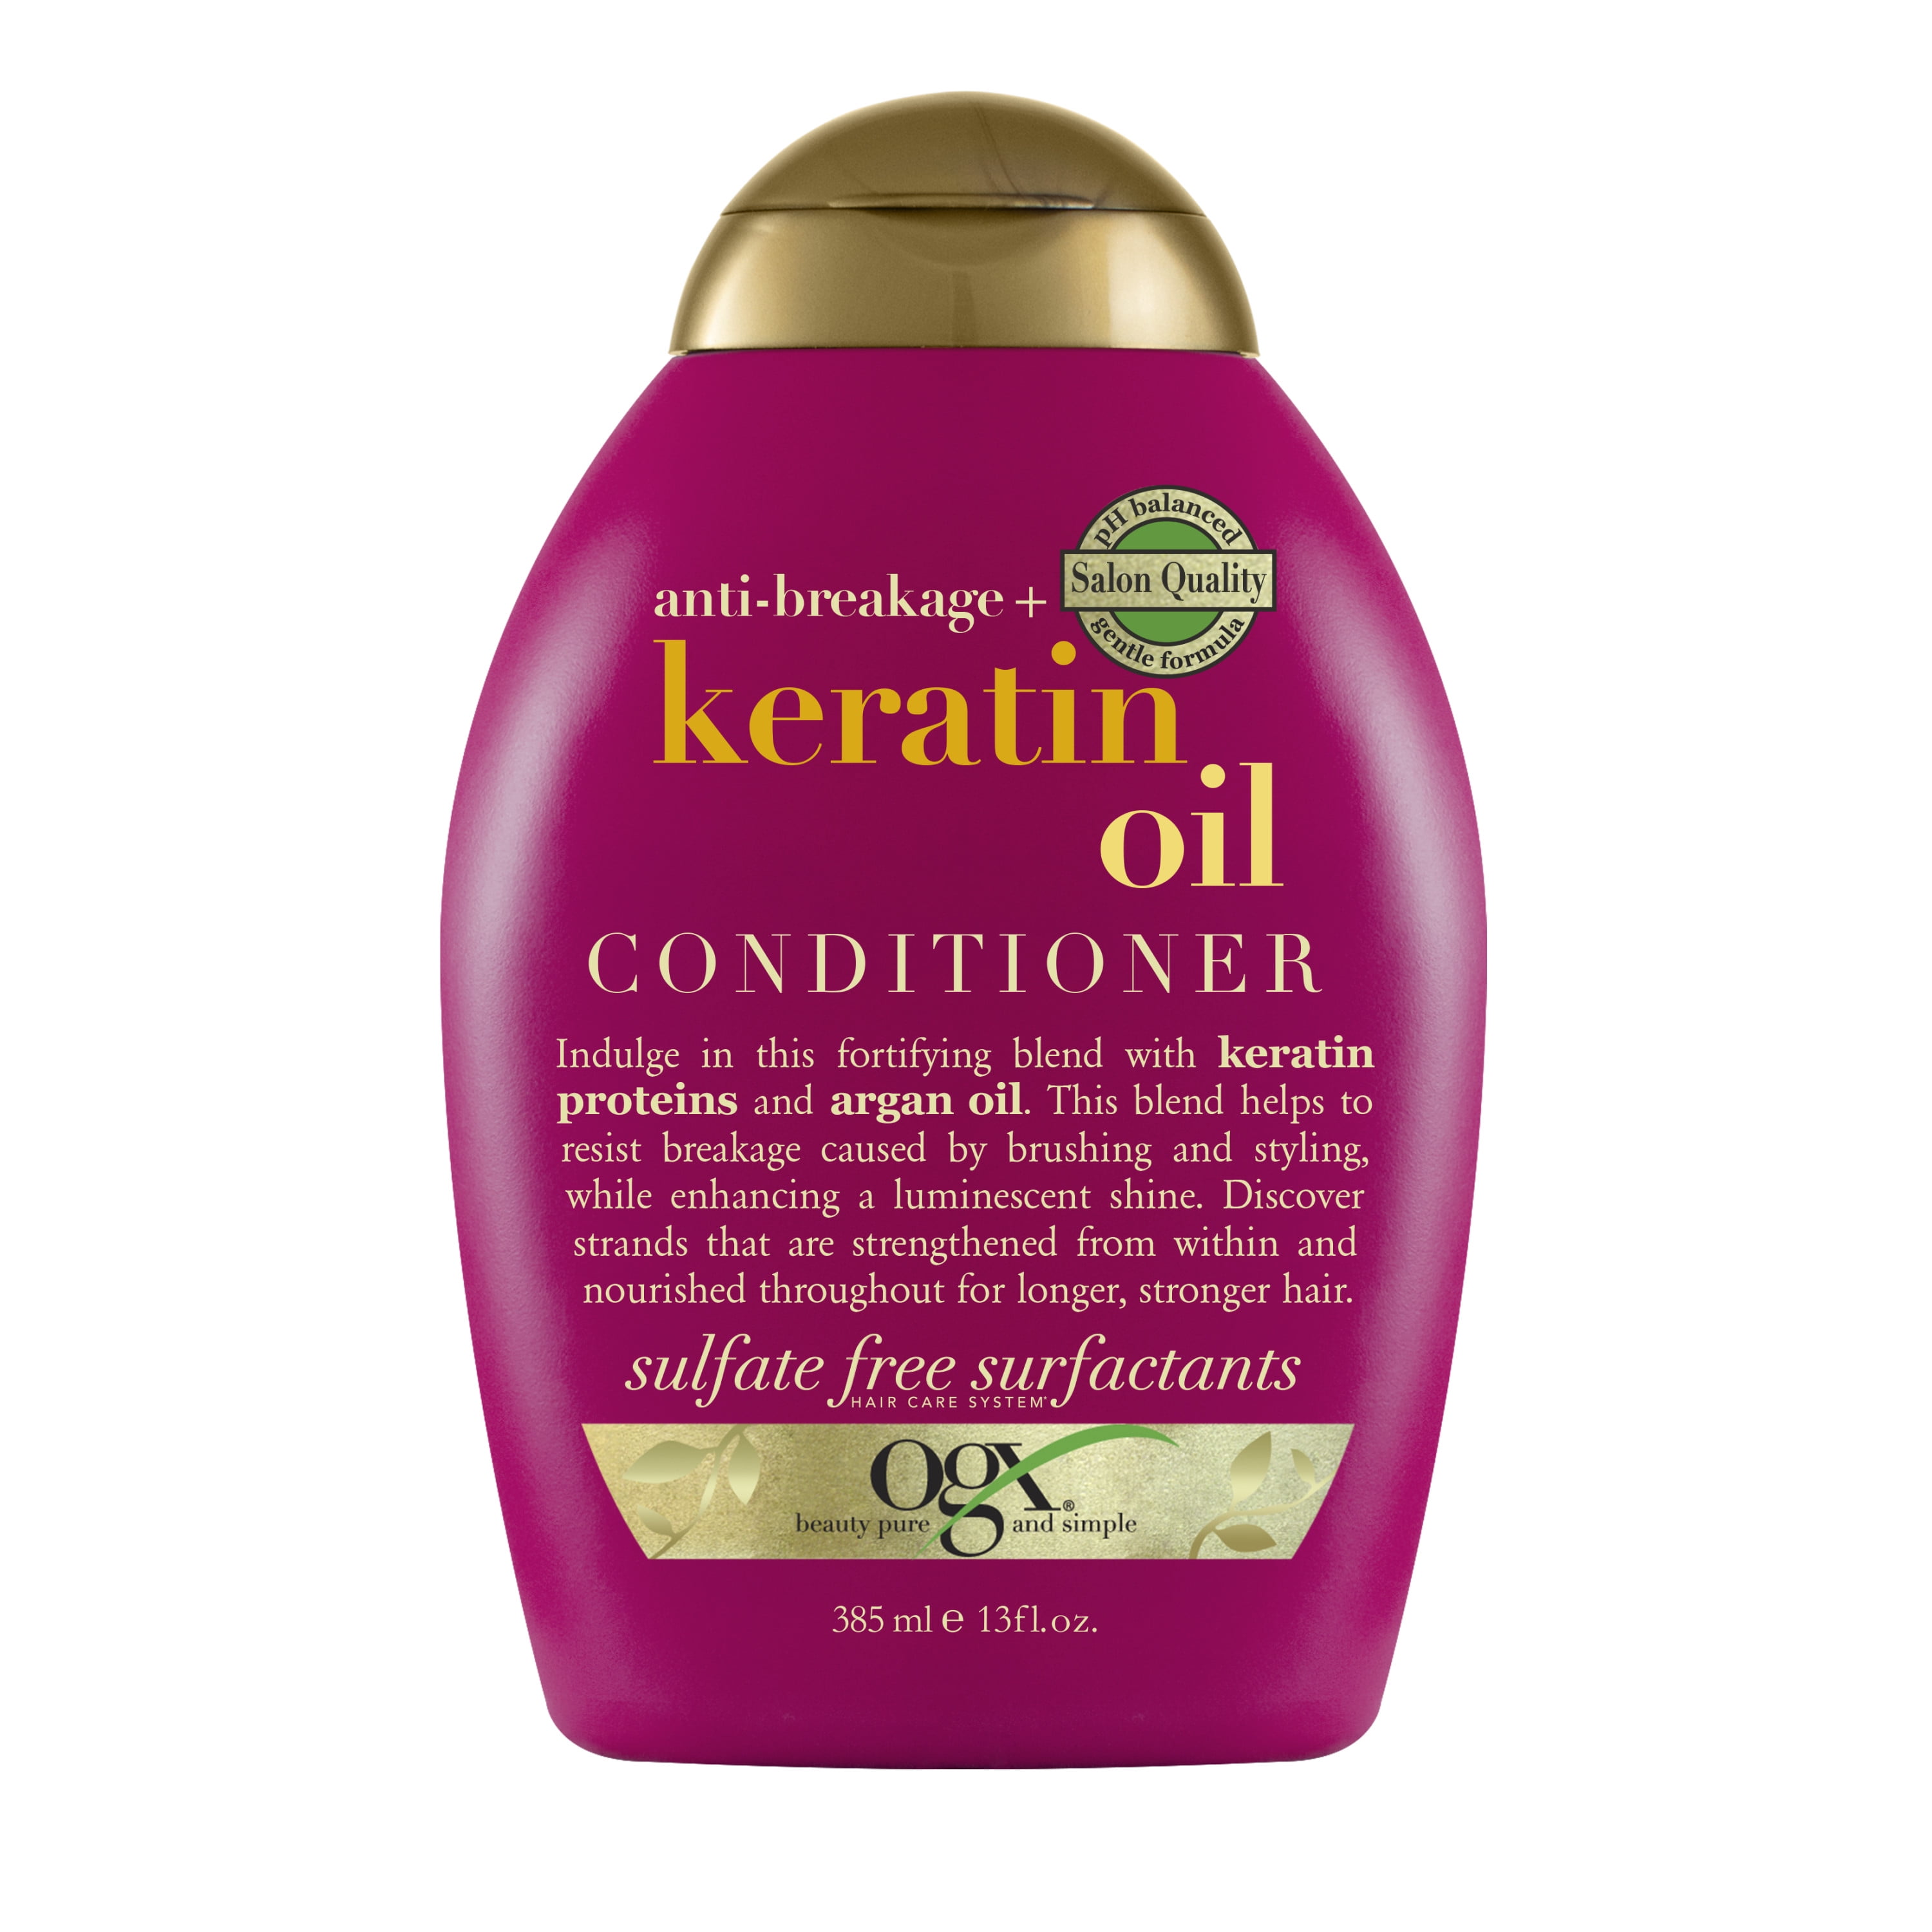 OGX Anti-Breakage + Keratin Oil Fortifying Anti-Frizz, Shine Enhancing Daily Conditioner for Damaged Hair & Split Ends with Argan Oil, 13 fl oz